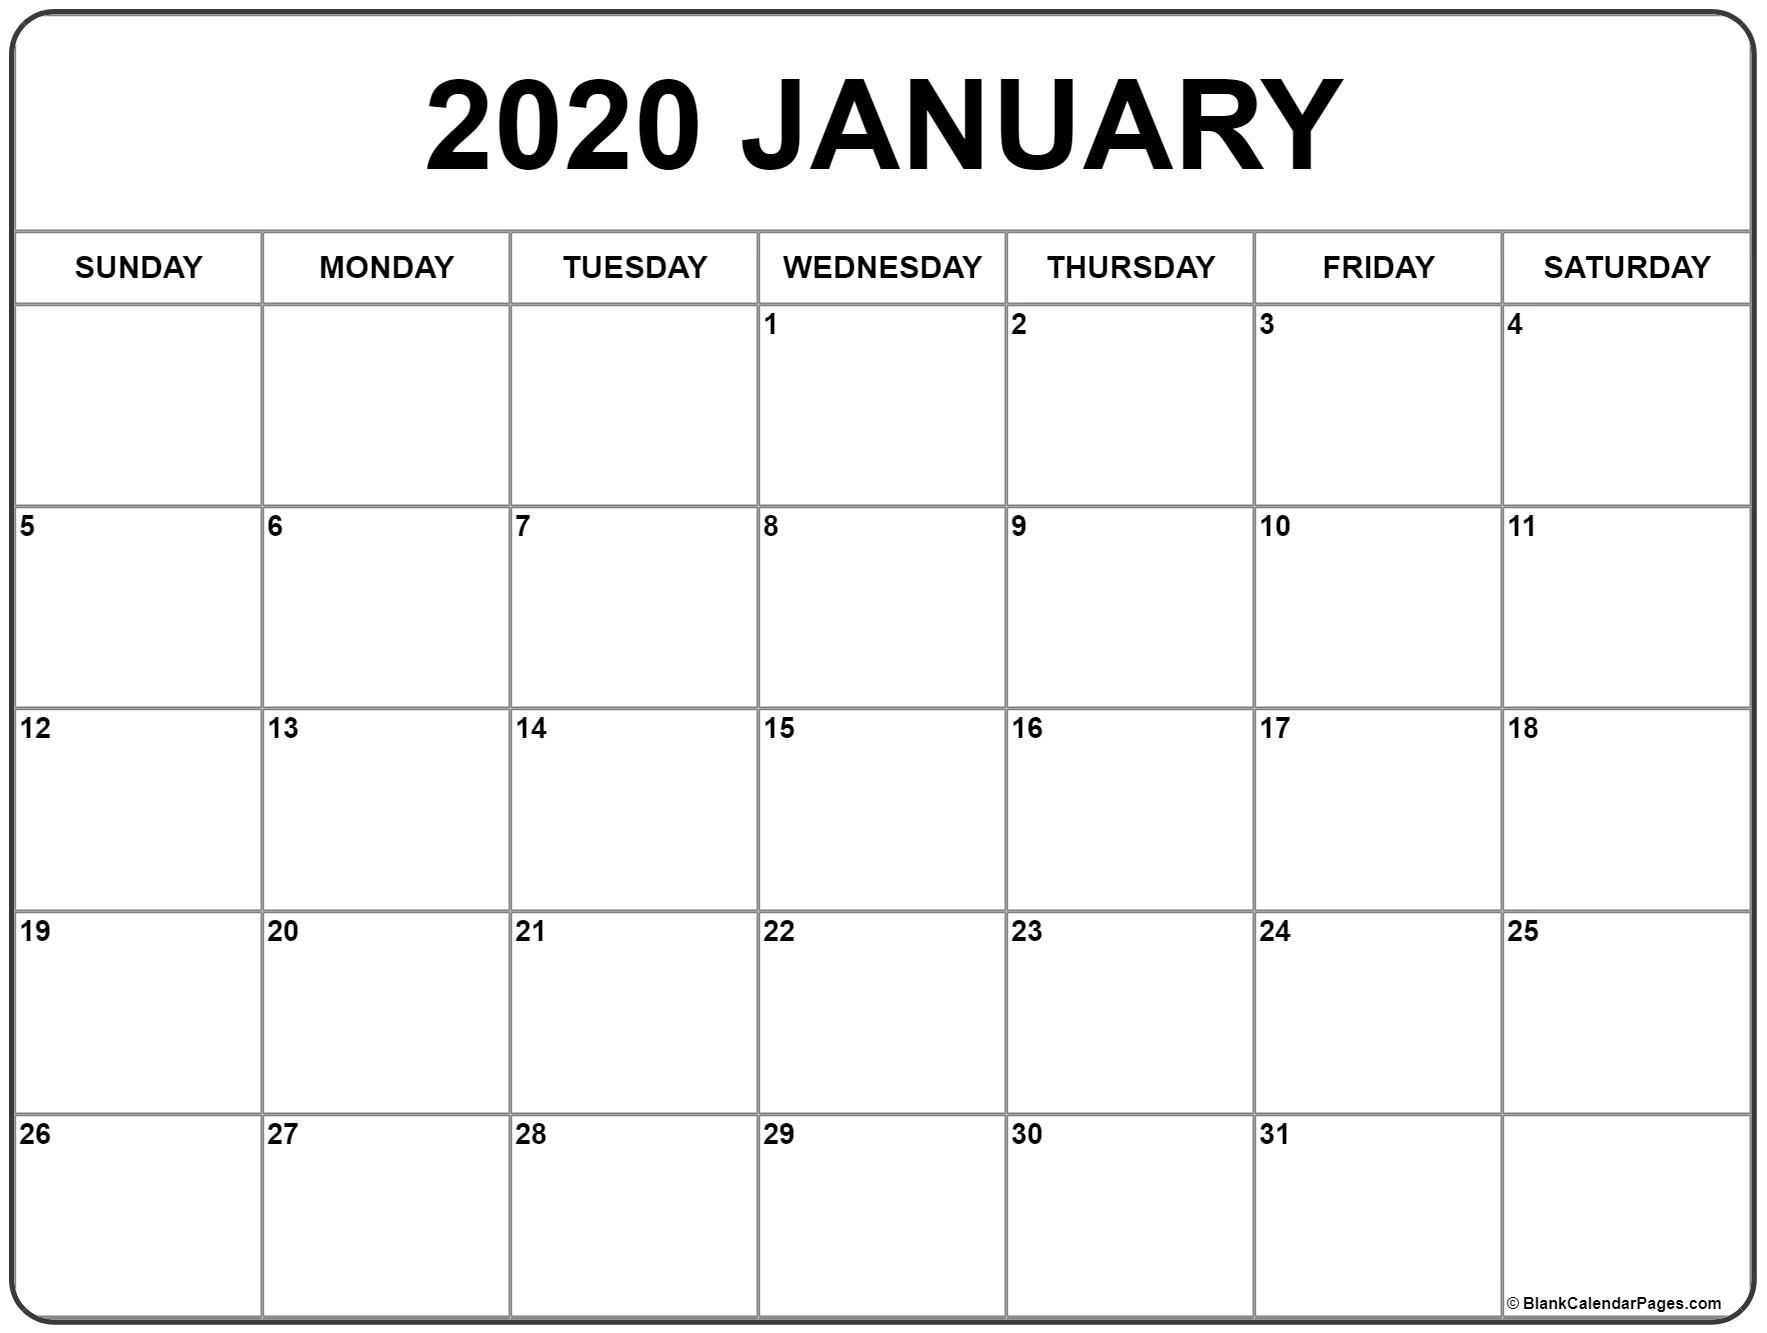 Extraordinary Monthly Calendar 2020 Without Weekends In 2020